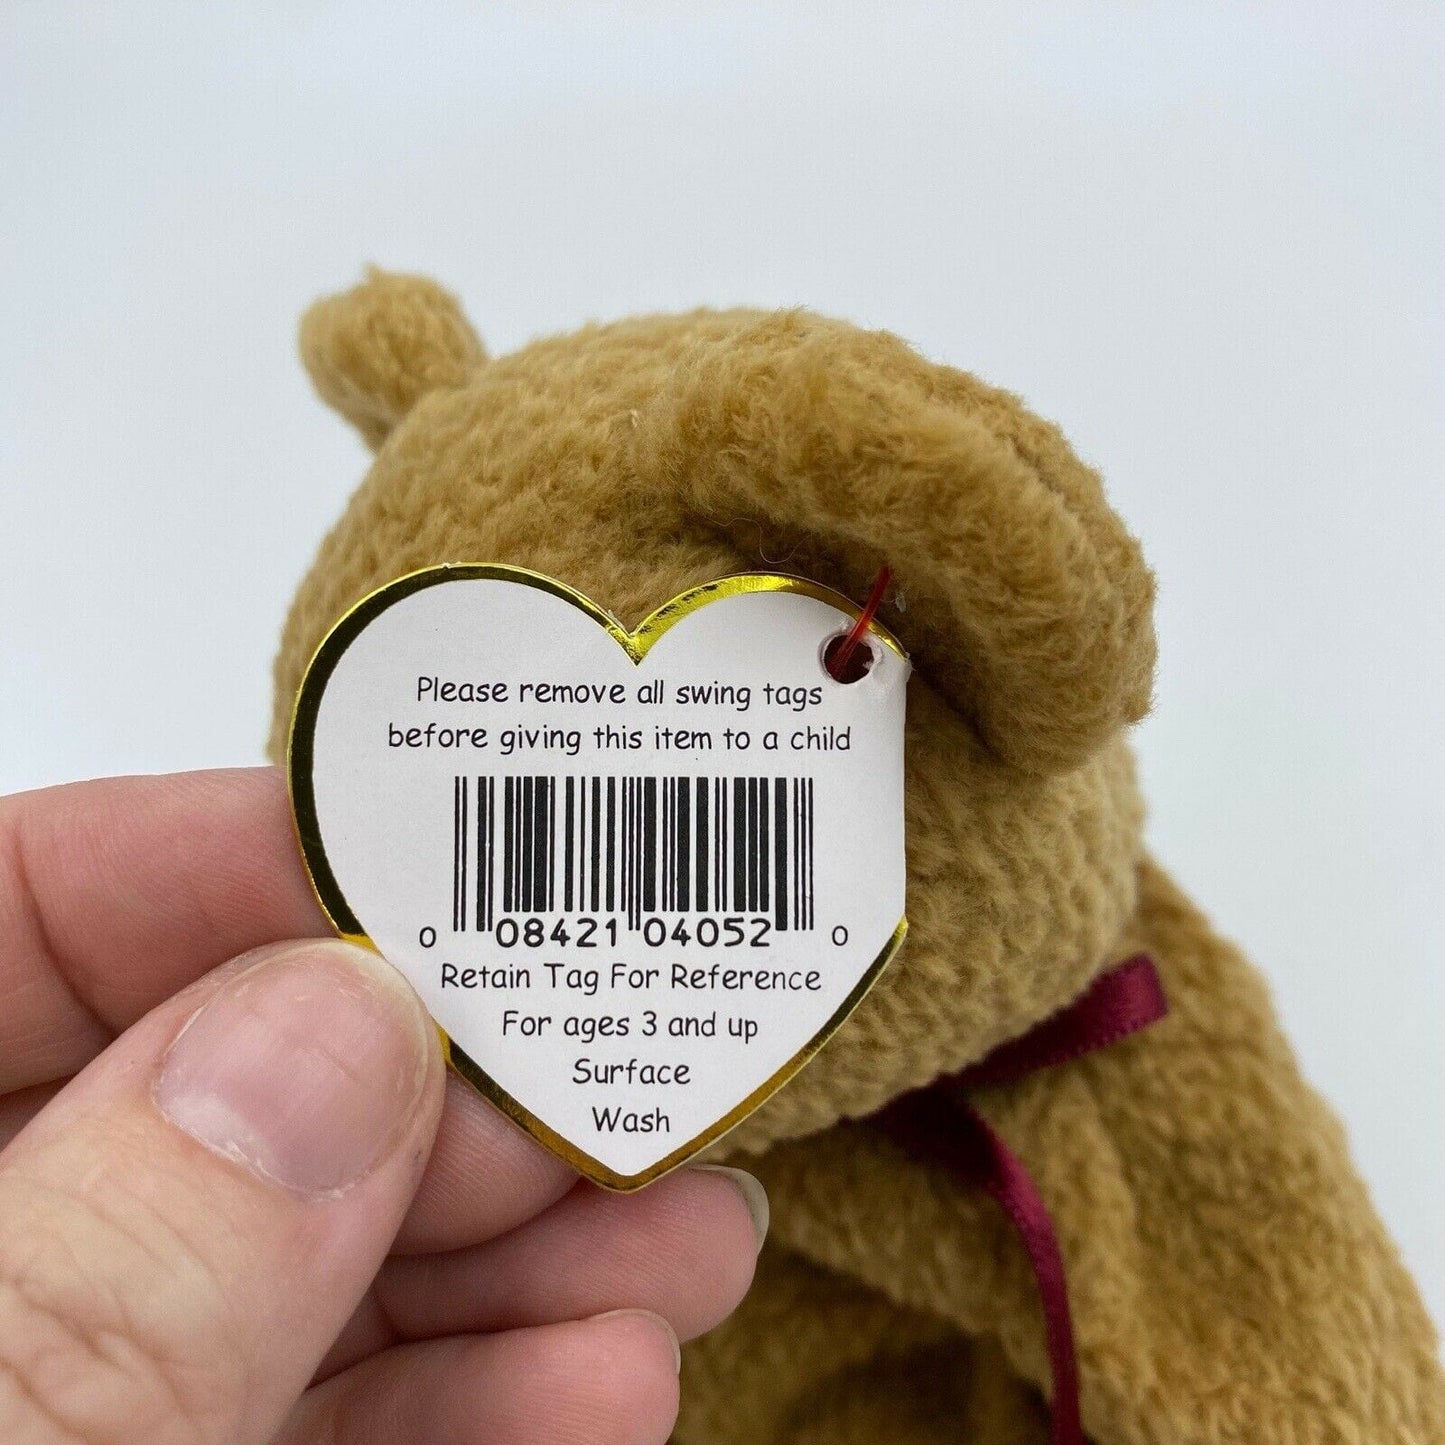 Rare Ty Original Beanie Babies “Curly” The Bear 1993 W/ Brown Nose Tag Errors